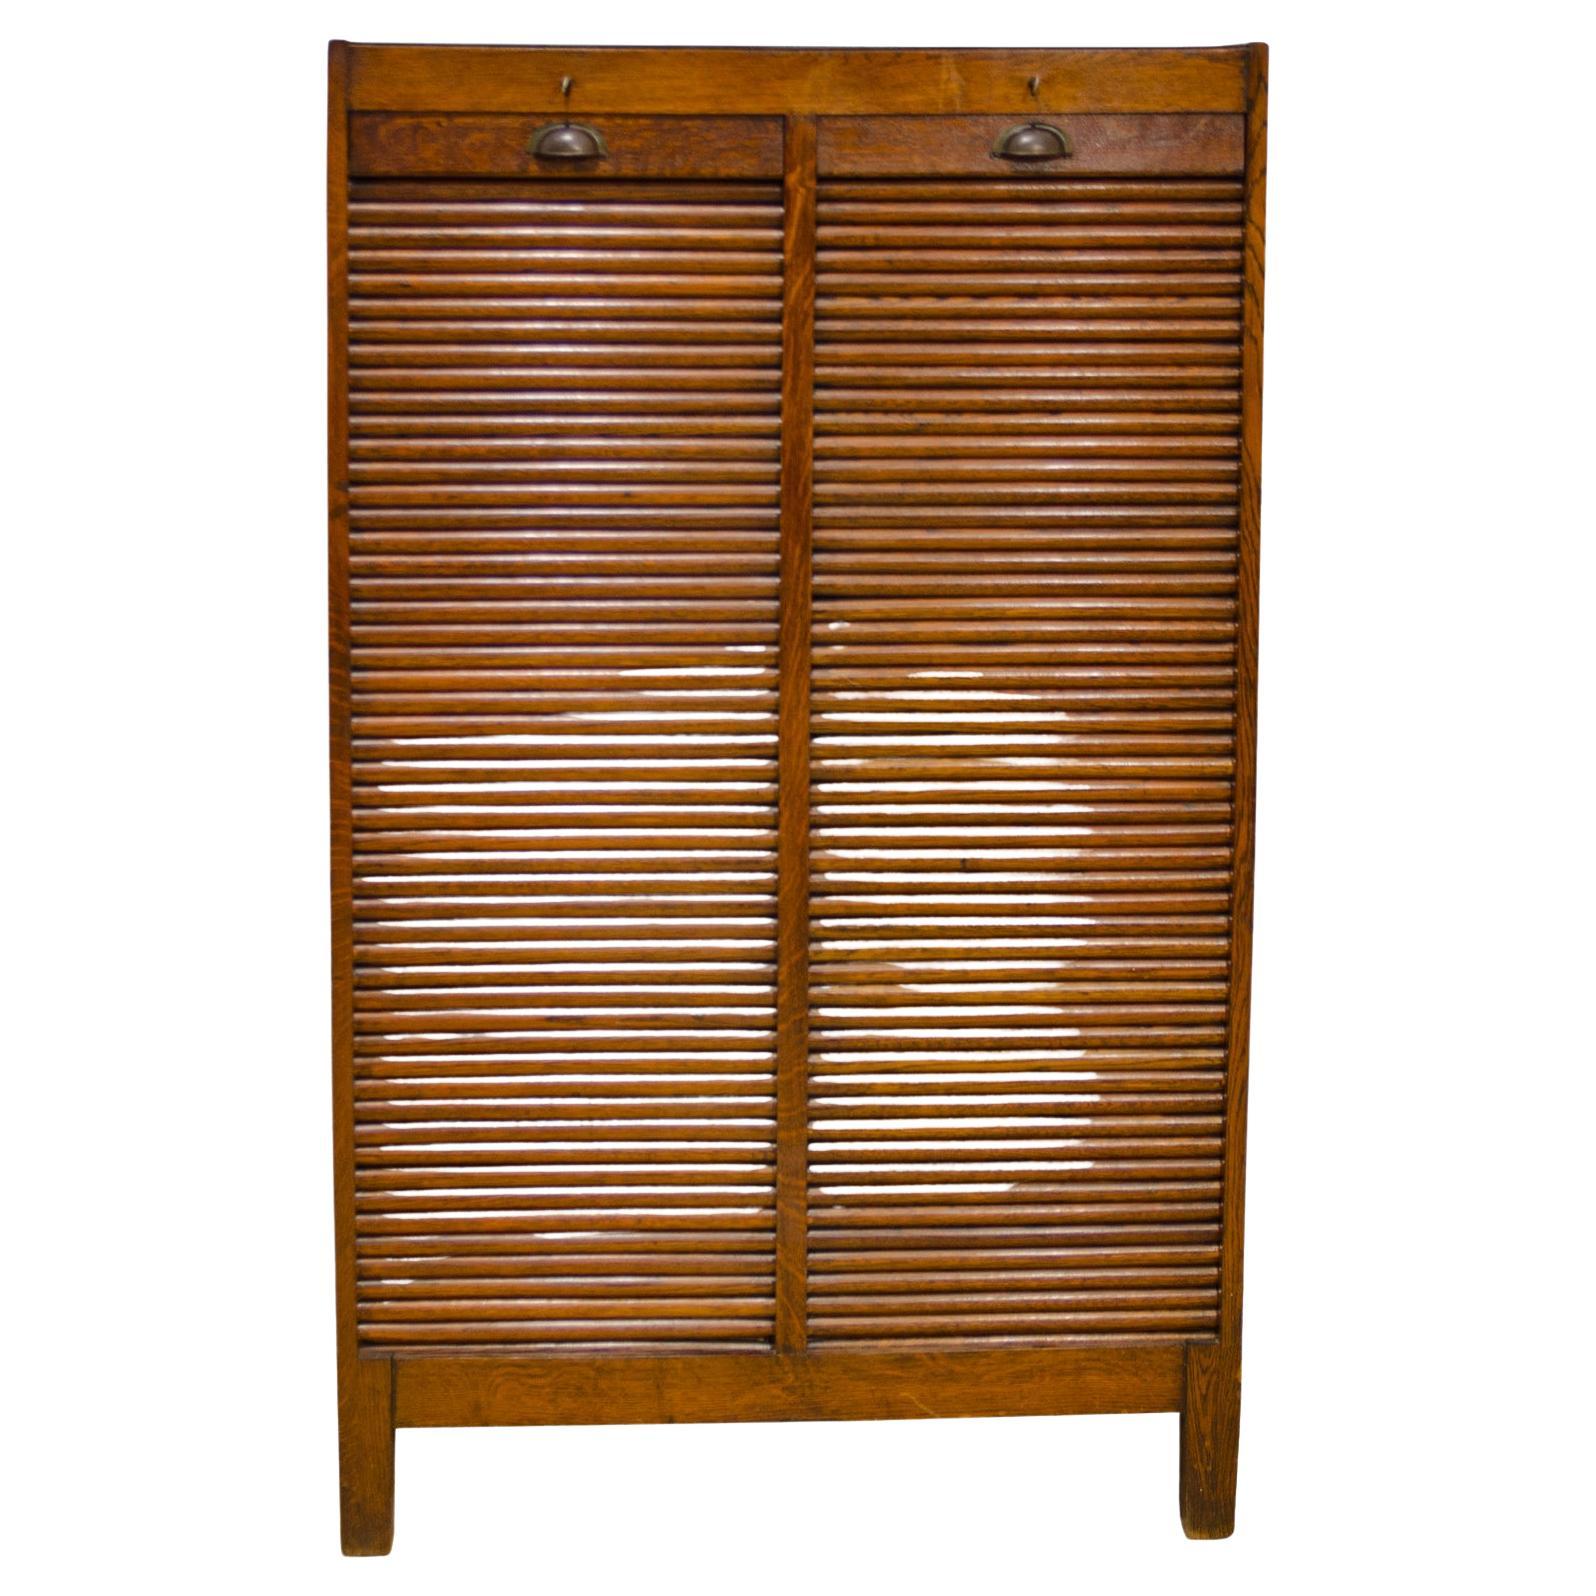 Roller blind cabinet made in the 1930s in the former Czechoslovakia. The cabinet has a rolling opening mechanism. It is suitable for the office, as well as for your apartment to store documents. It is in very good condition, it was renovated in the